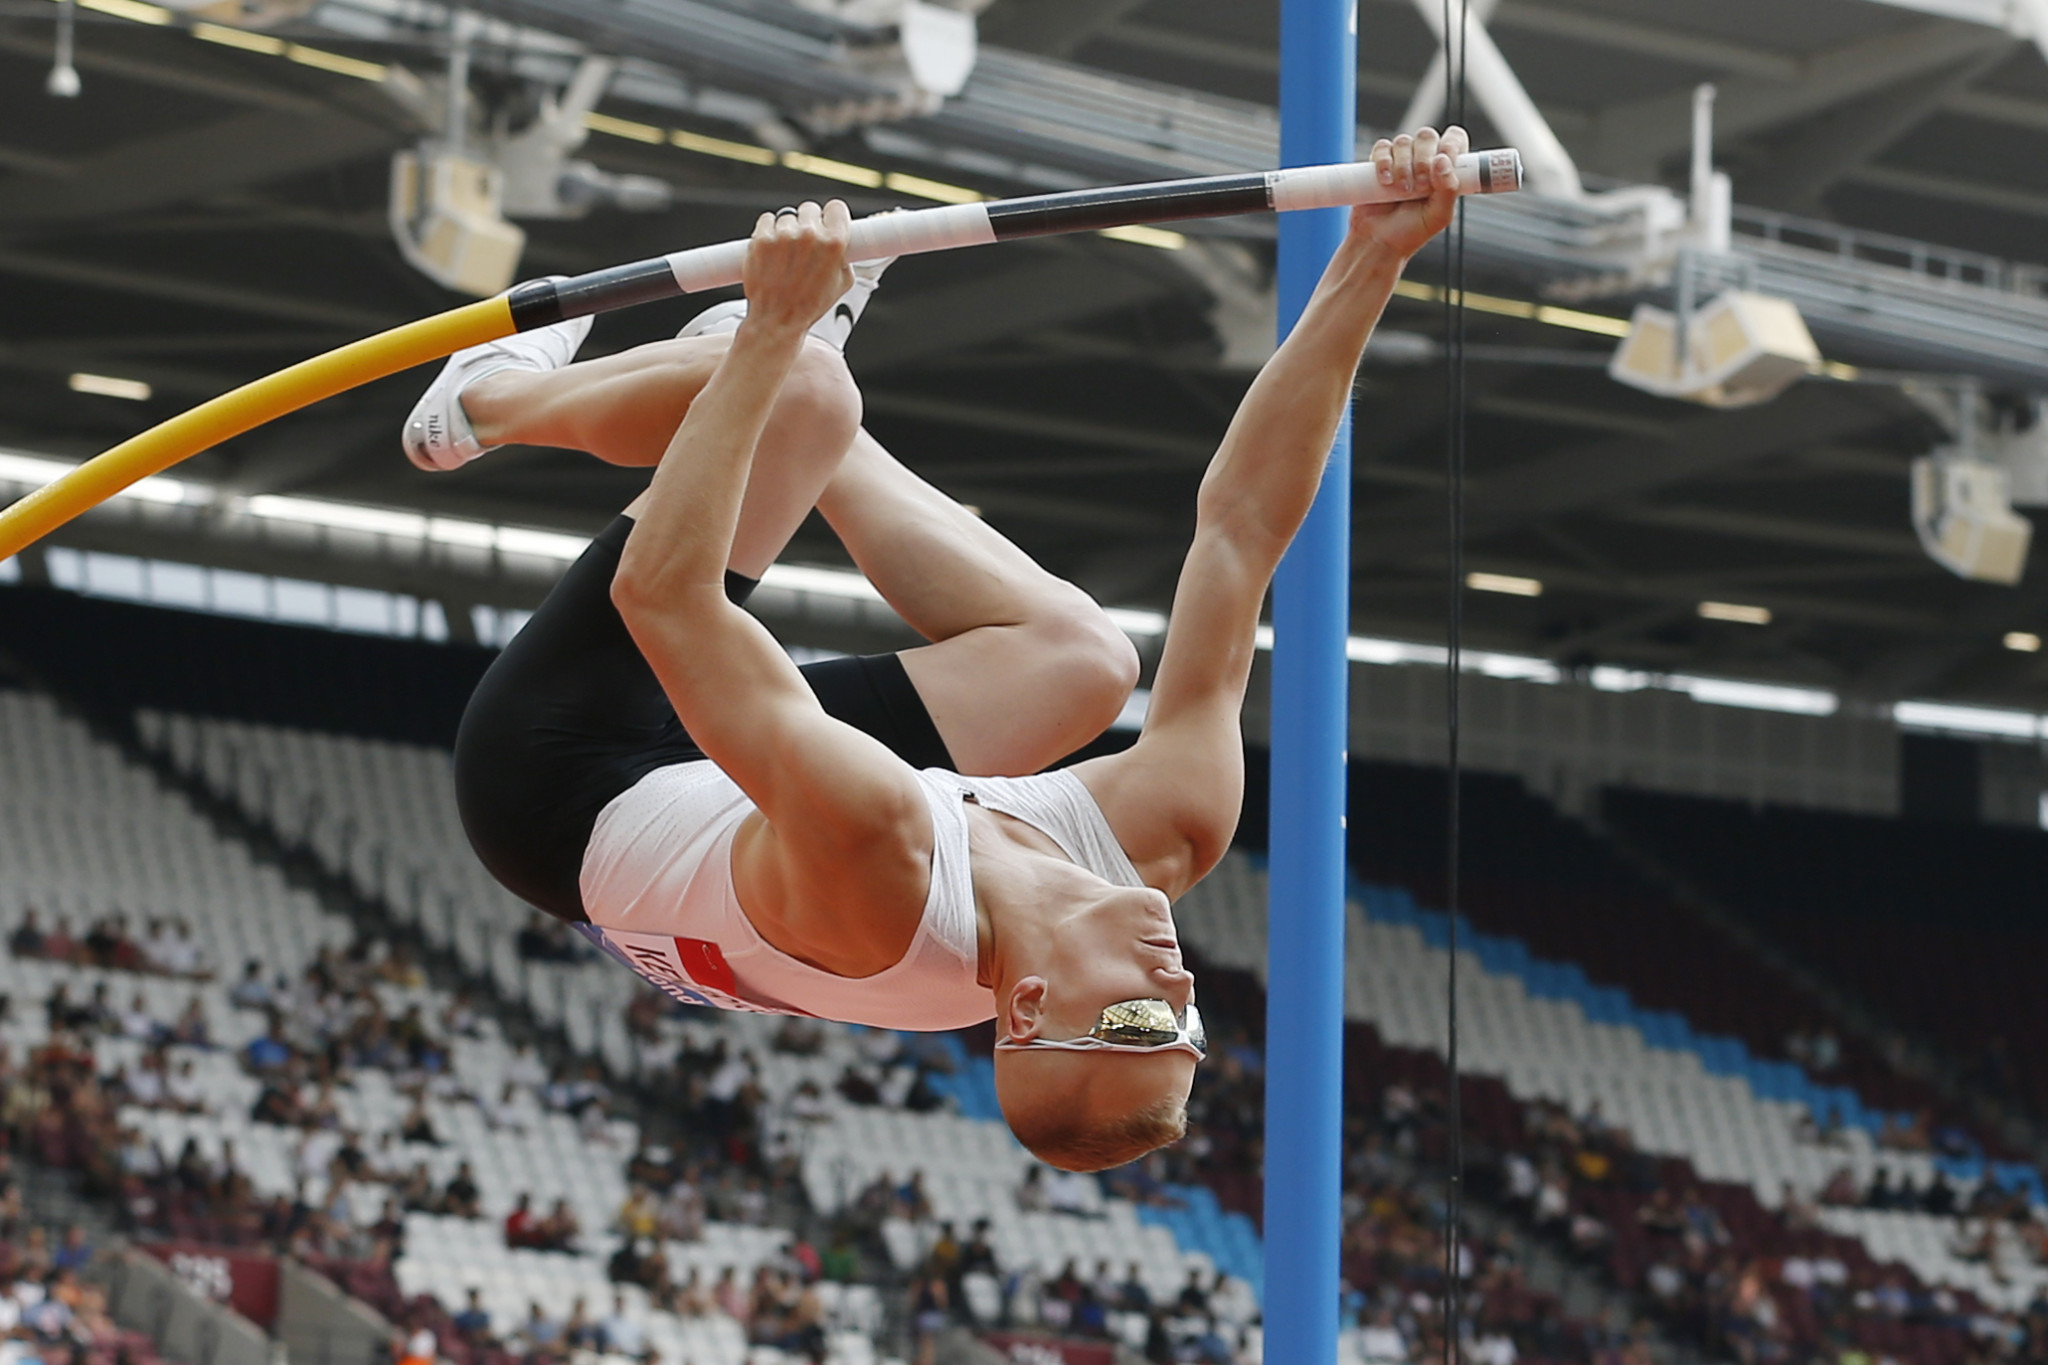 World pole vault champion Sam Kendricks is among the athletes to raise concerns over the timing of the two events ©Getty Images